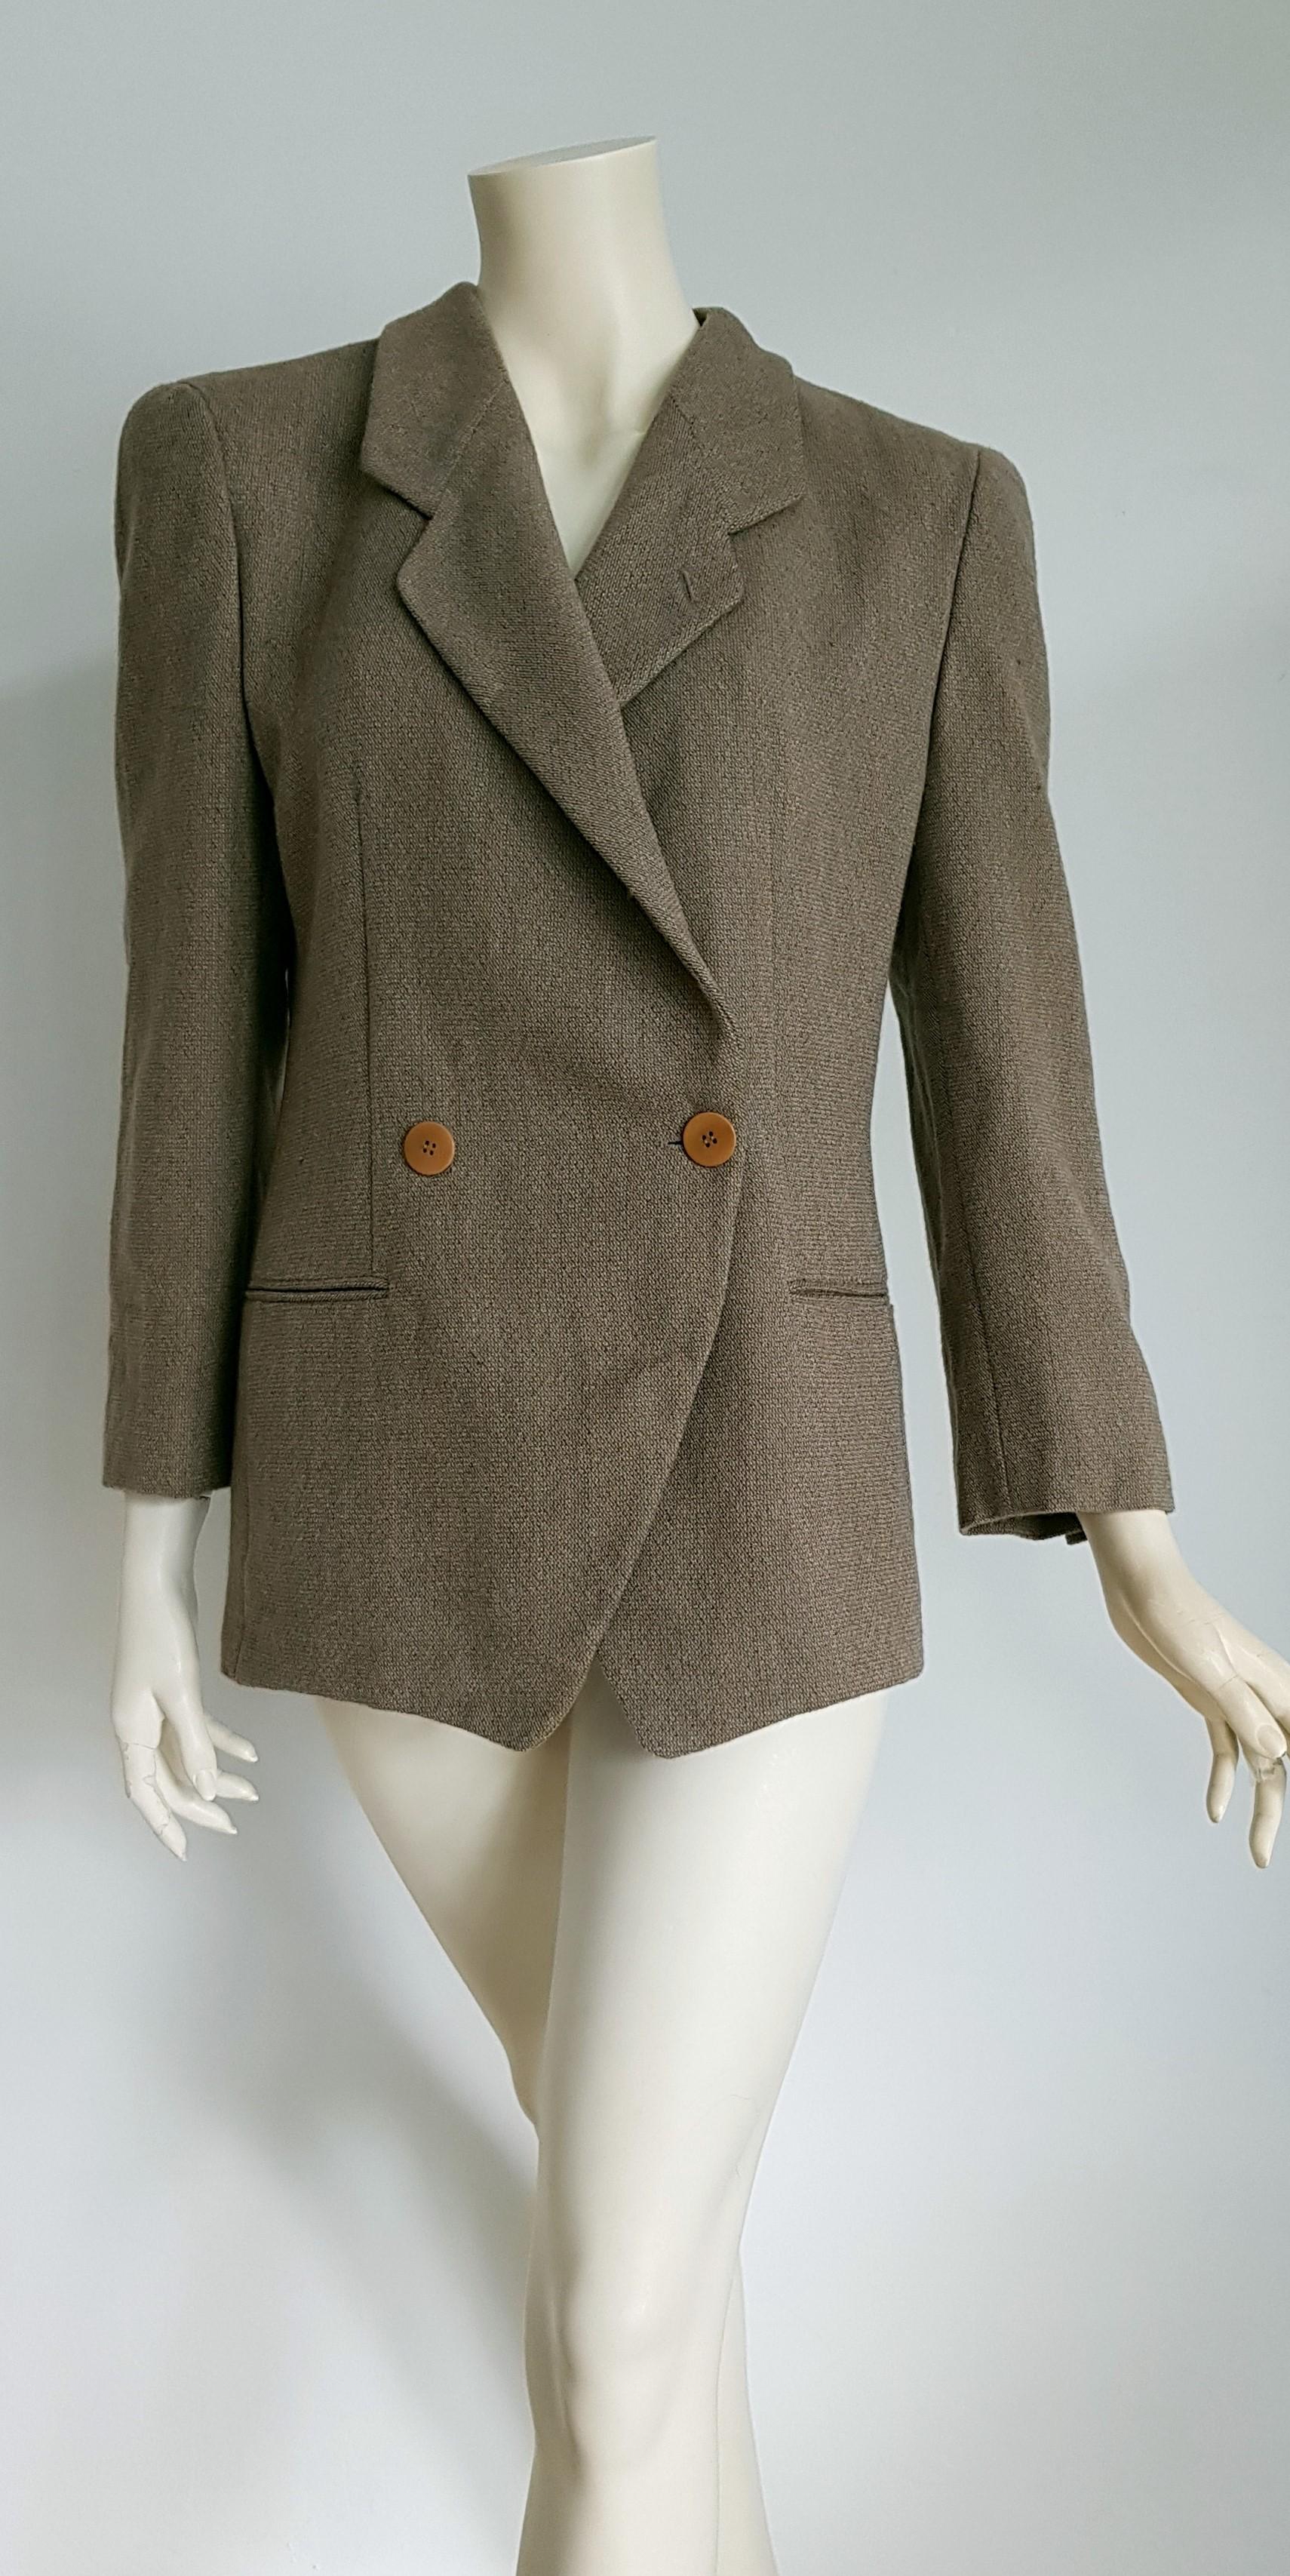 Giorgio ARMANI brown and beige double-breasted wool jacket - Unworn, New
..
SIZE: equivalent to about Small / Medium, please review approx measurements as follows in cm: lenght 73, chest underarm to underarm 51, bust circumference 93, shoulder from